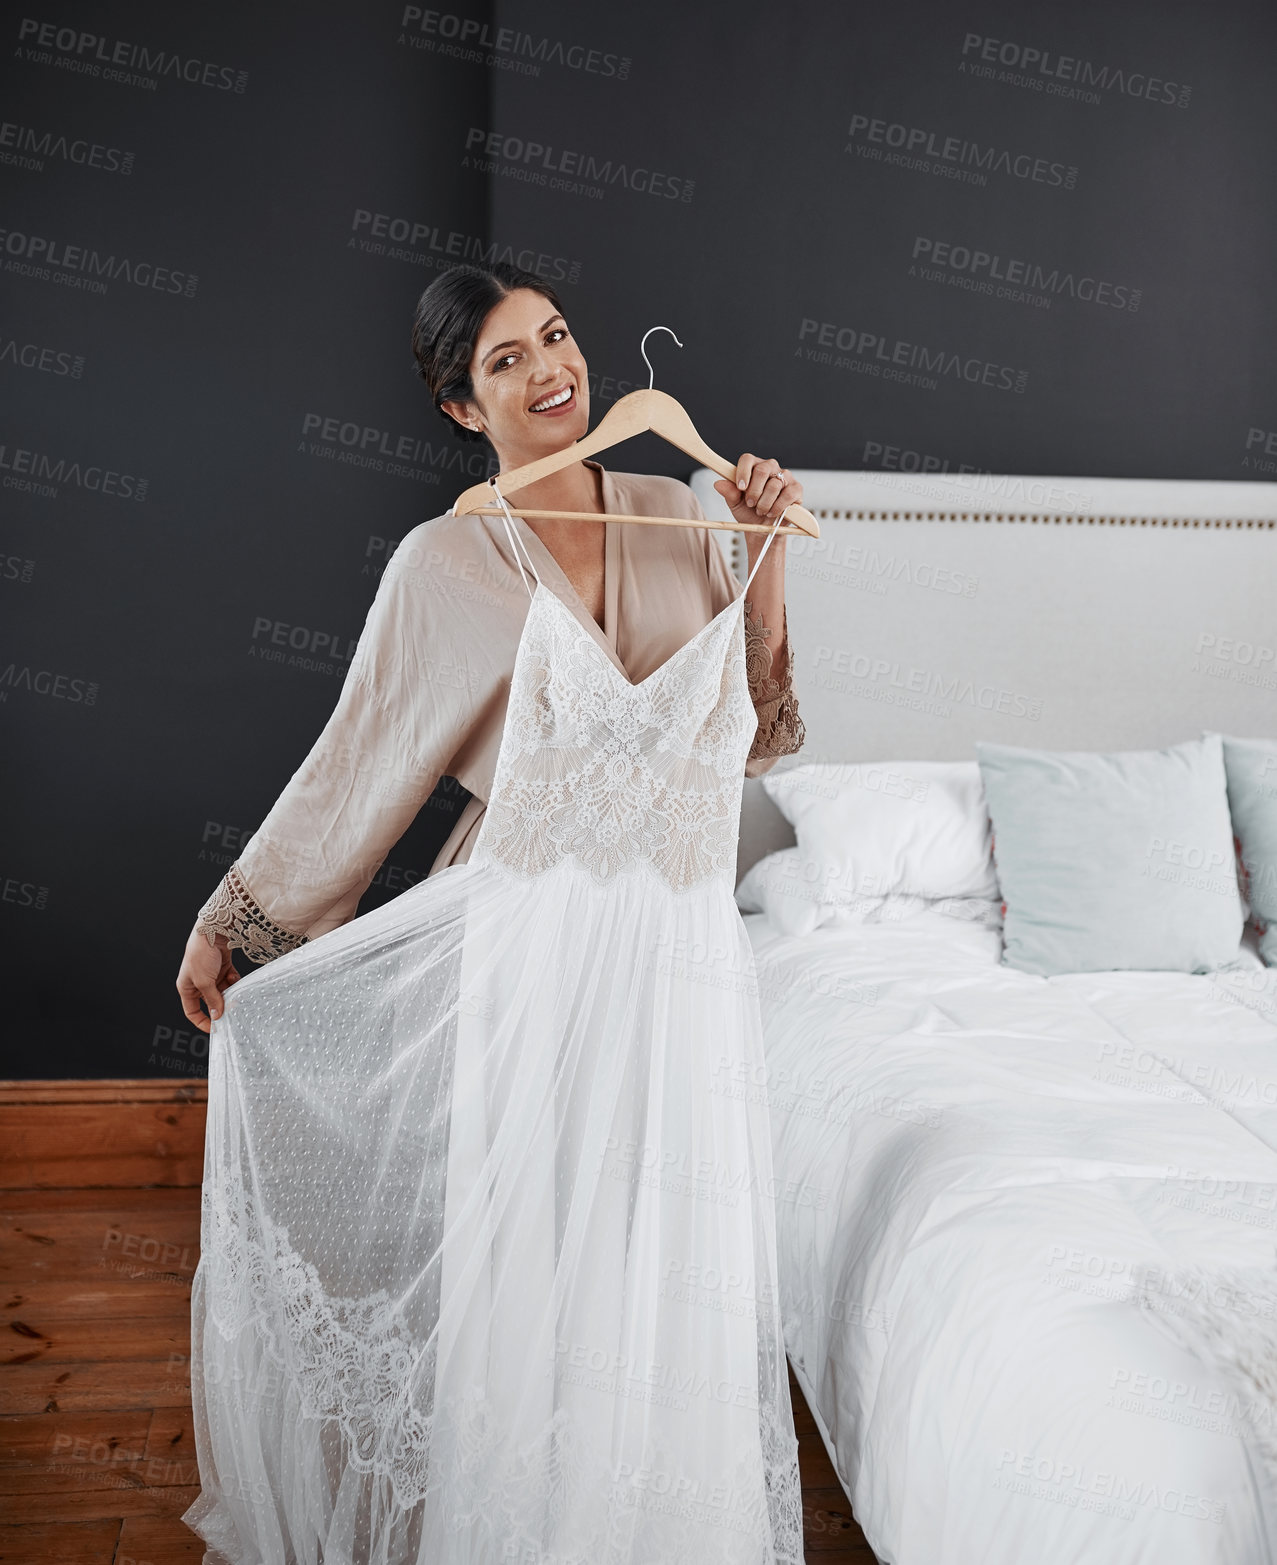 Buy stock photo Cropped portrait of an attractive young bride getting ready for her wedding ceremony in her bedroom